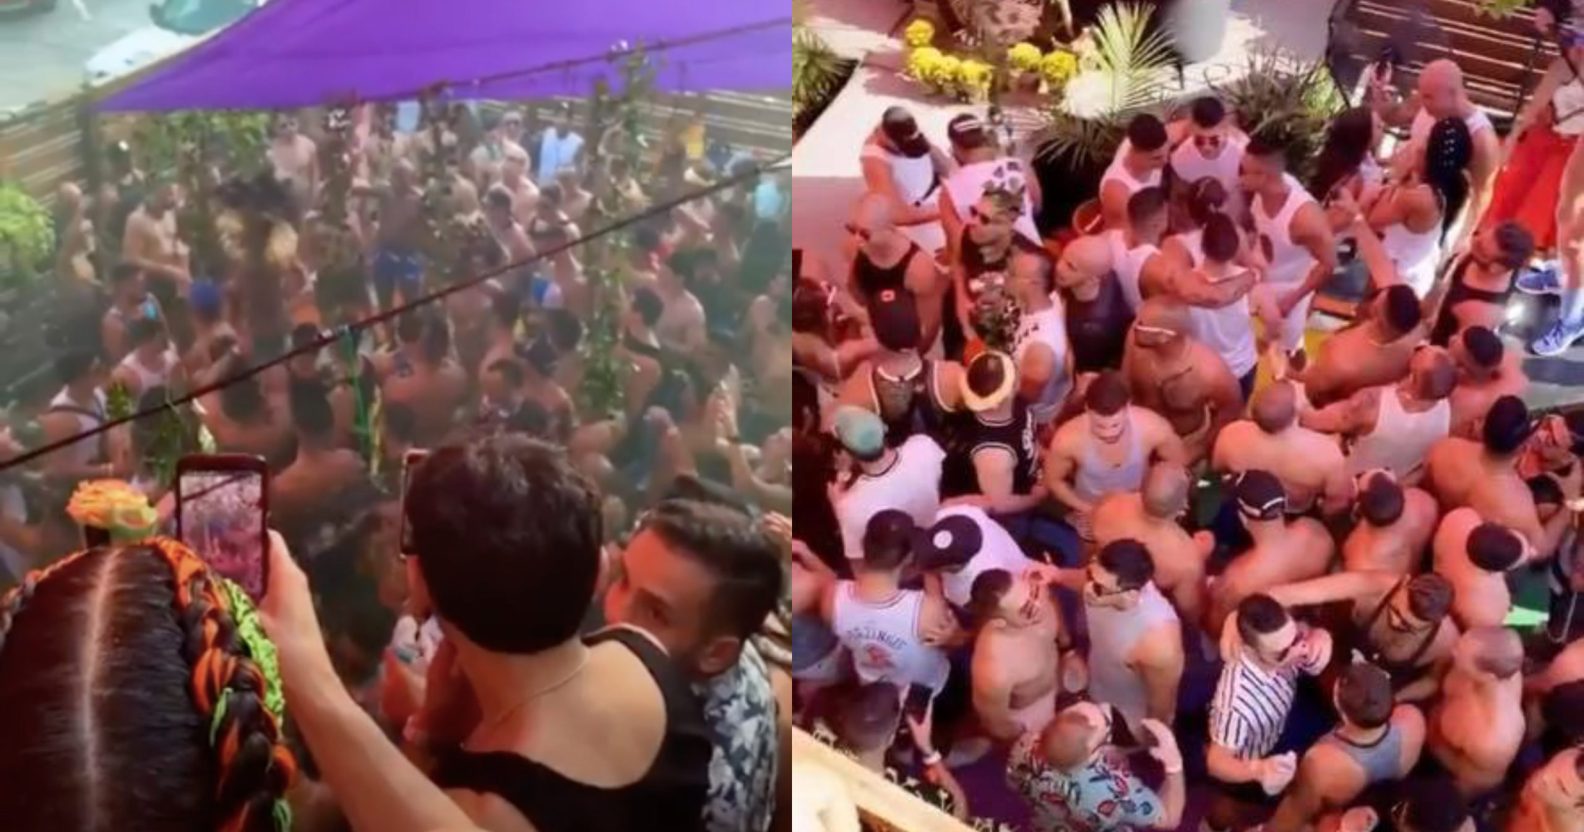 Peach Party Atlanta circuit party condemned after crowded photos